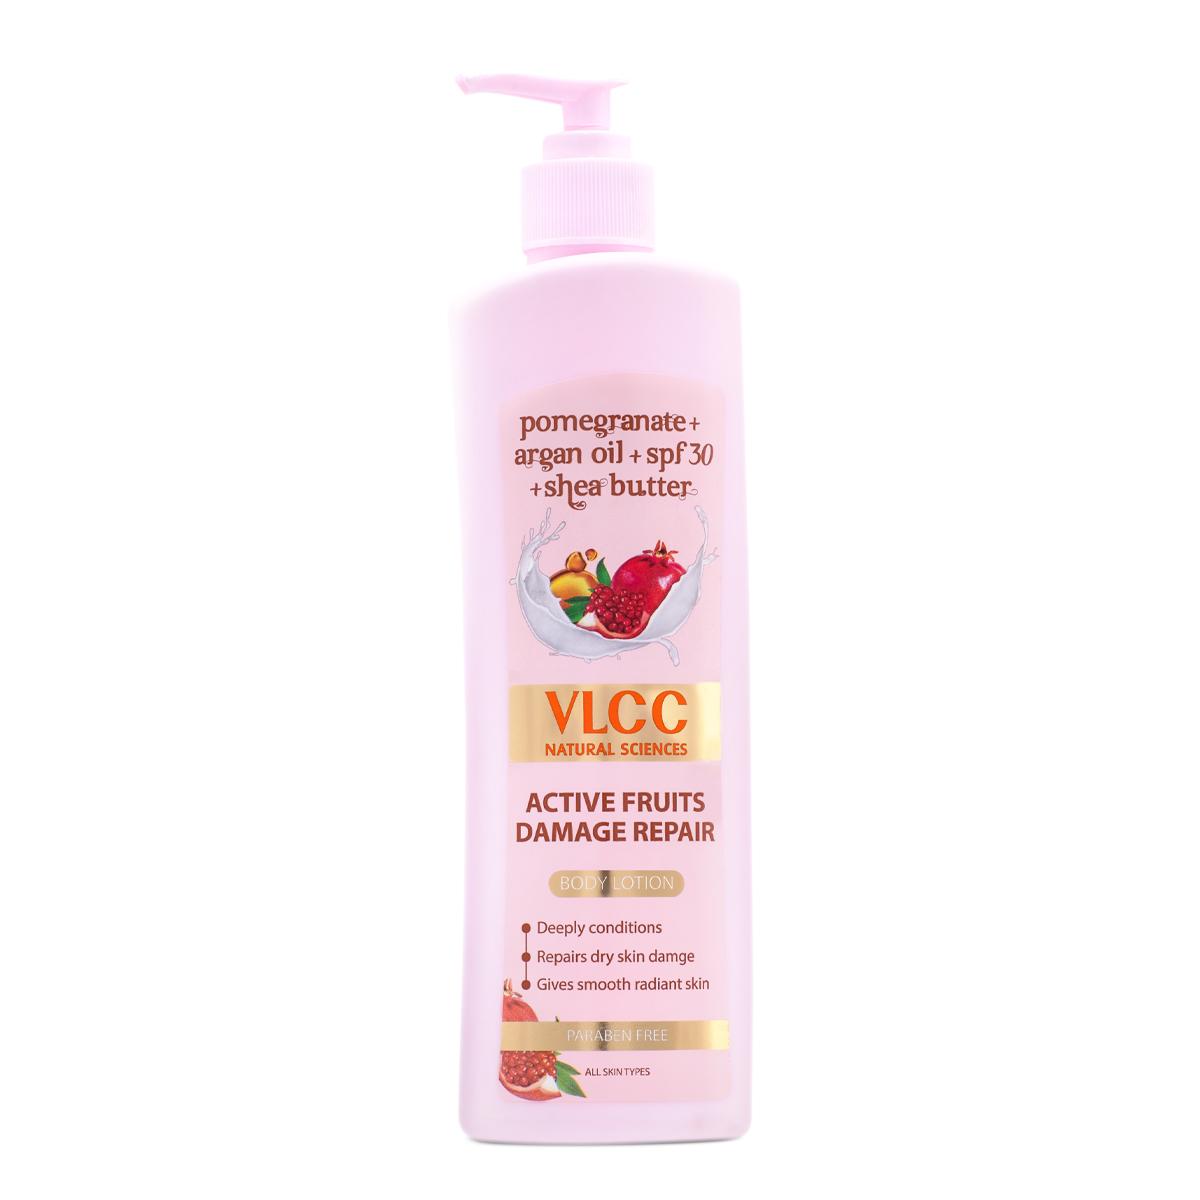 VLCC Active Fruits Damage Repair Body Lotion SPF 30 PA+++ - Nourish and Restore Your Skin's Health